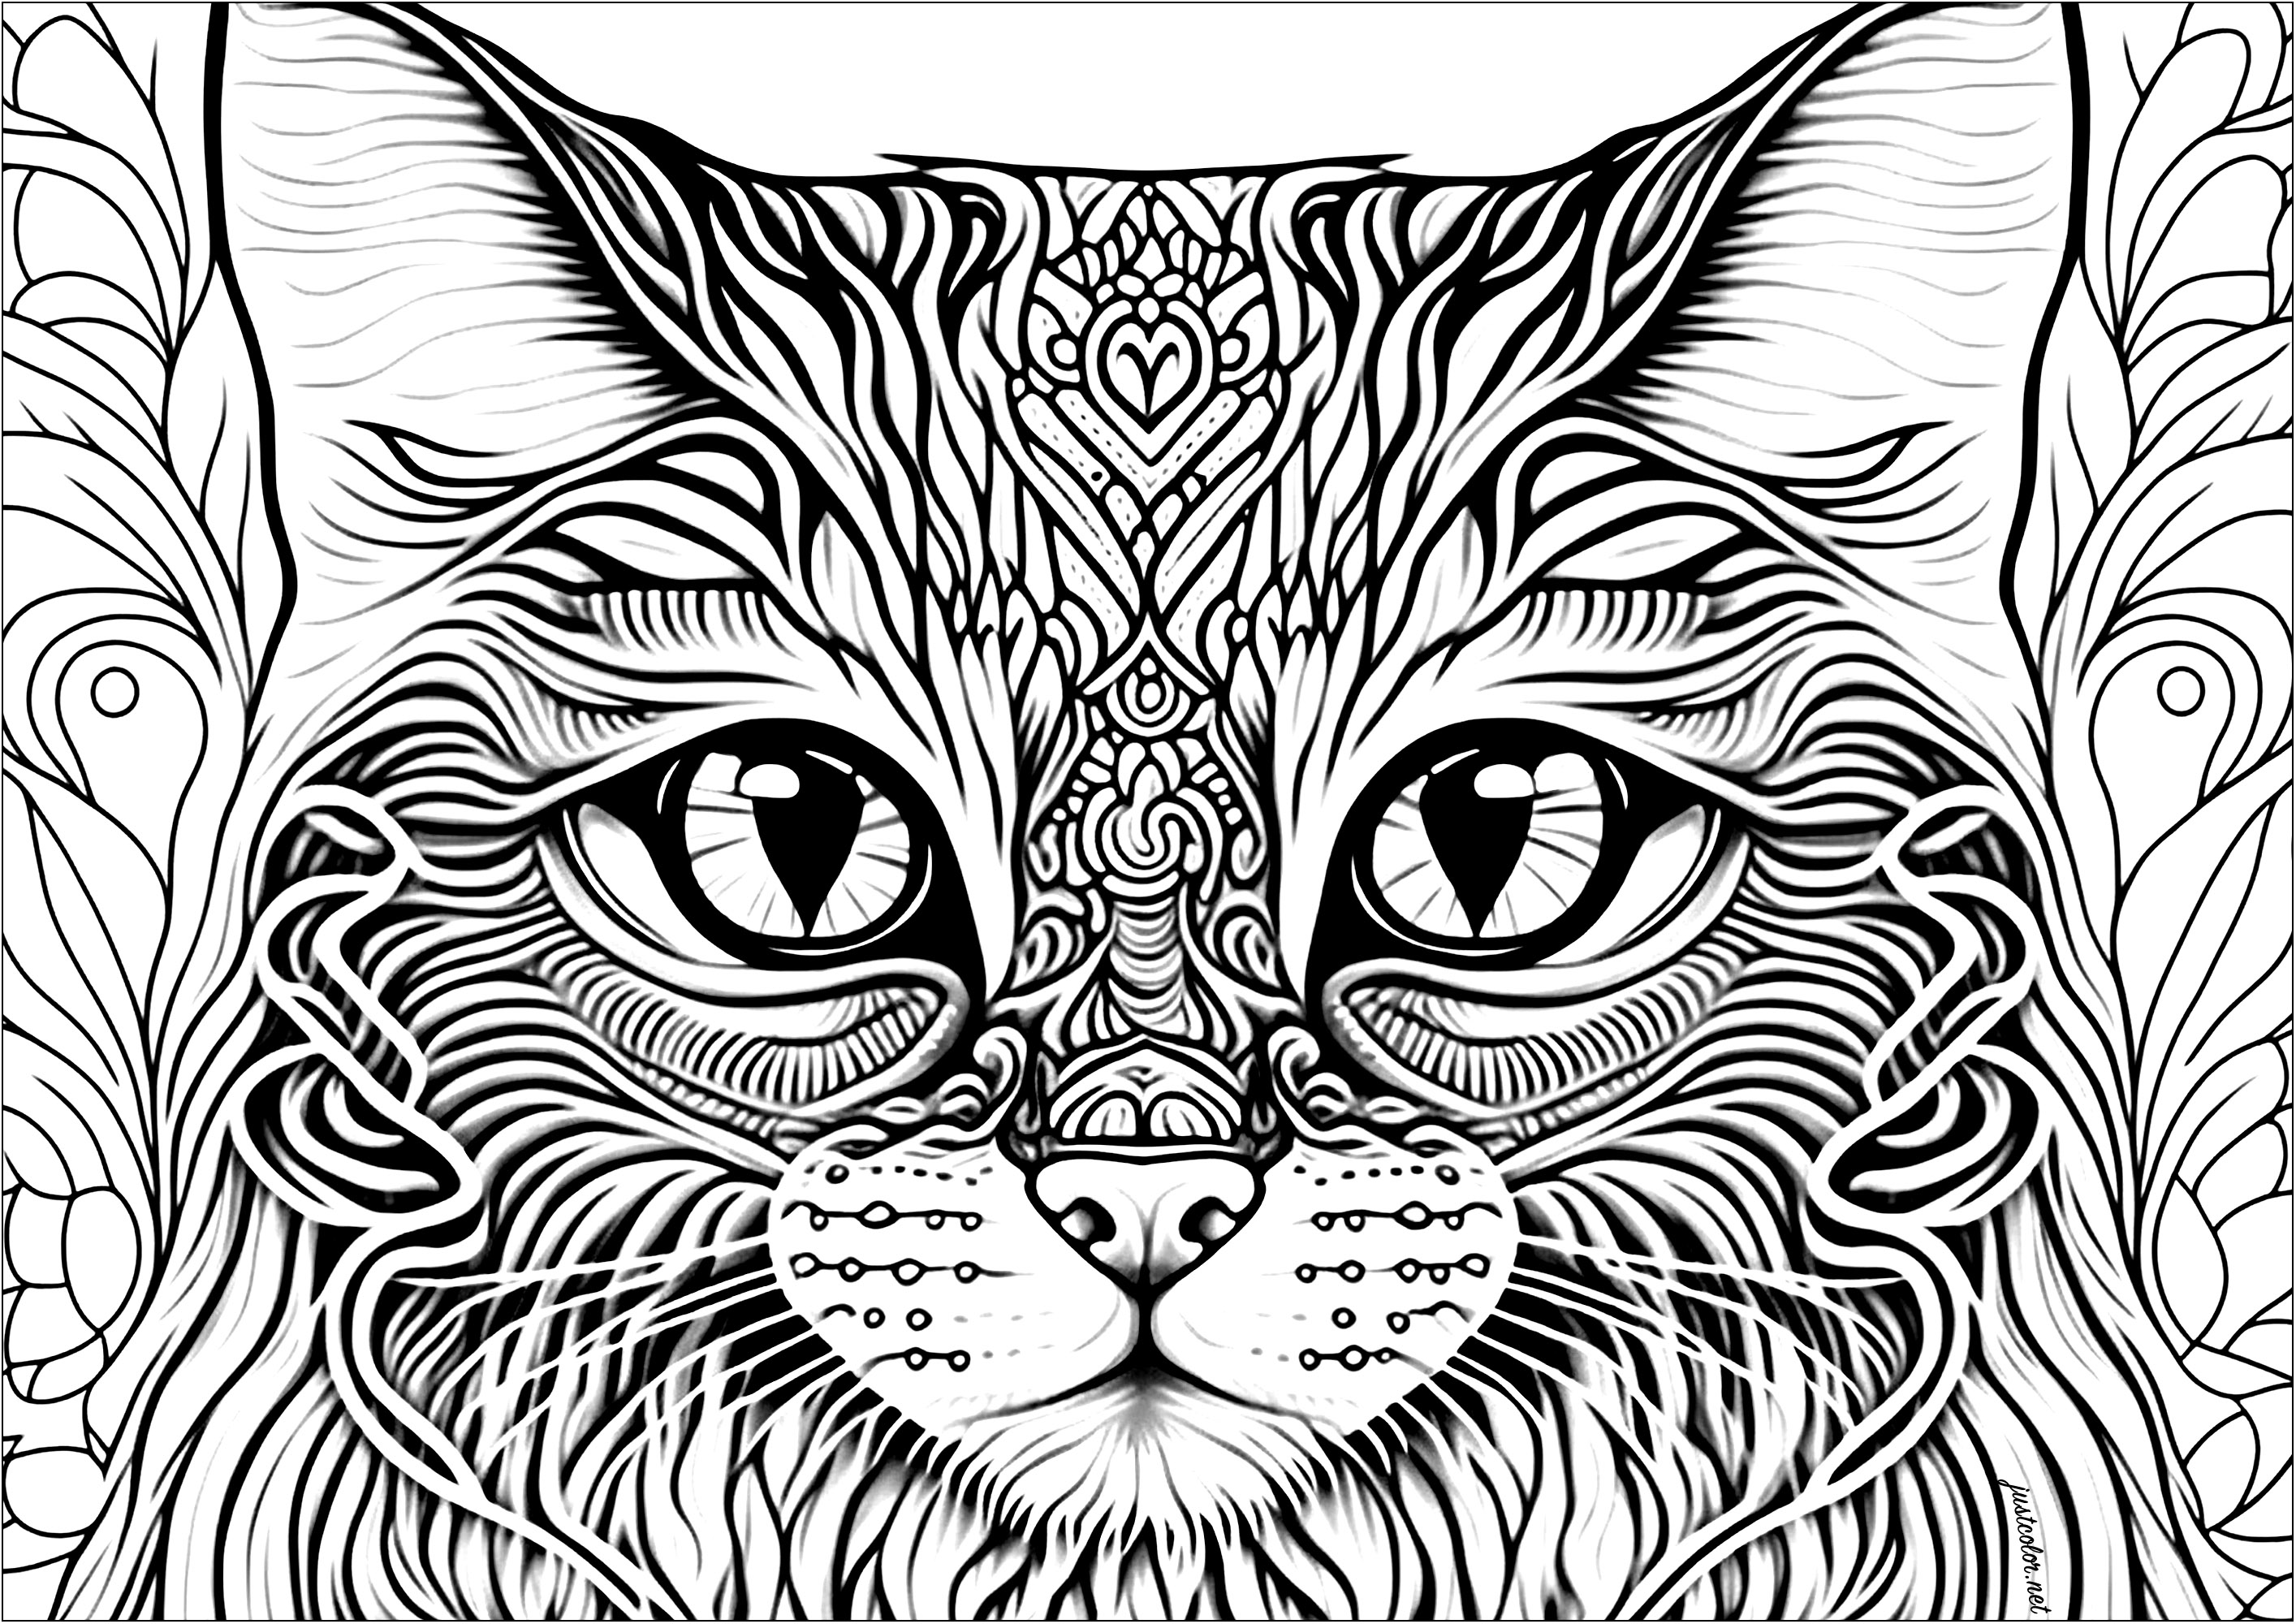 A beautiful cat head, with patterns to color. Many areas to put in color, quite intermingled ... Relaxing effect guaranteed thanks to this pretty cat